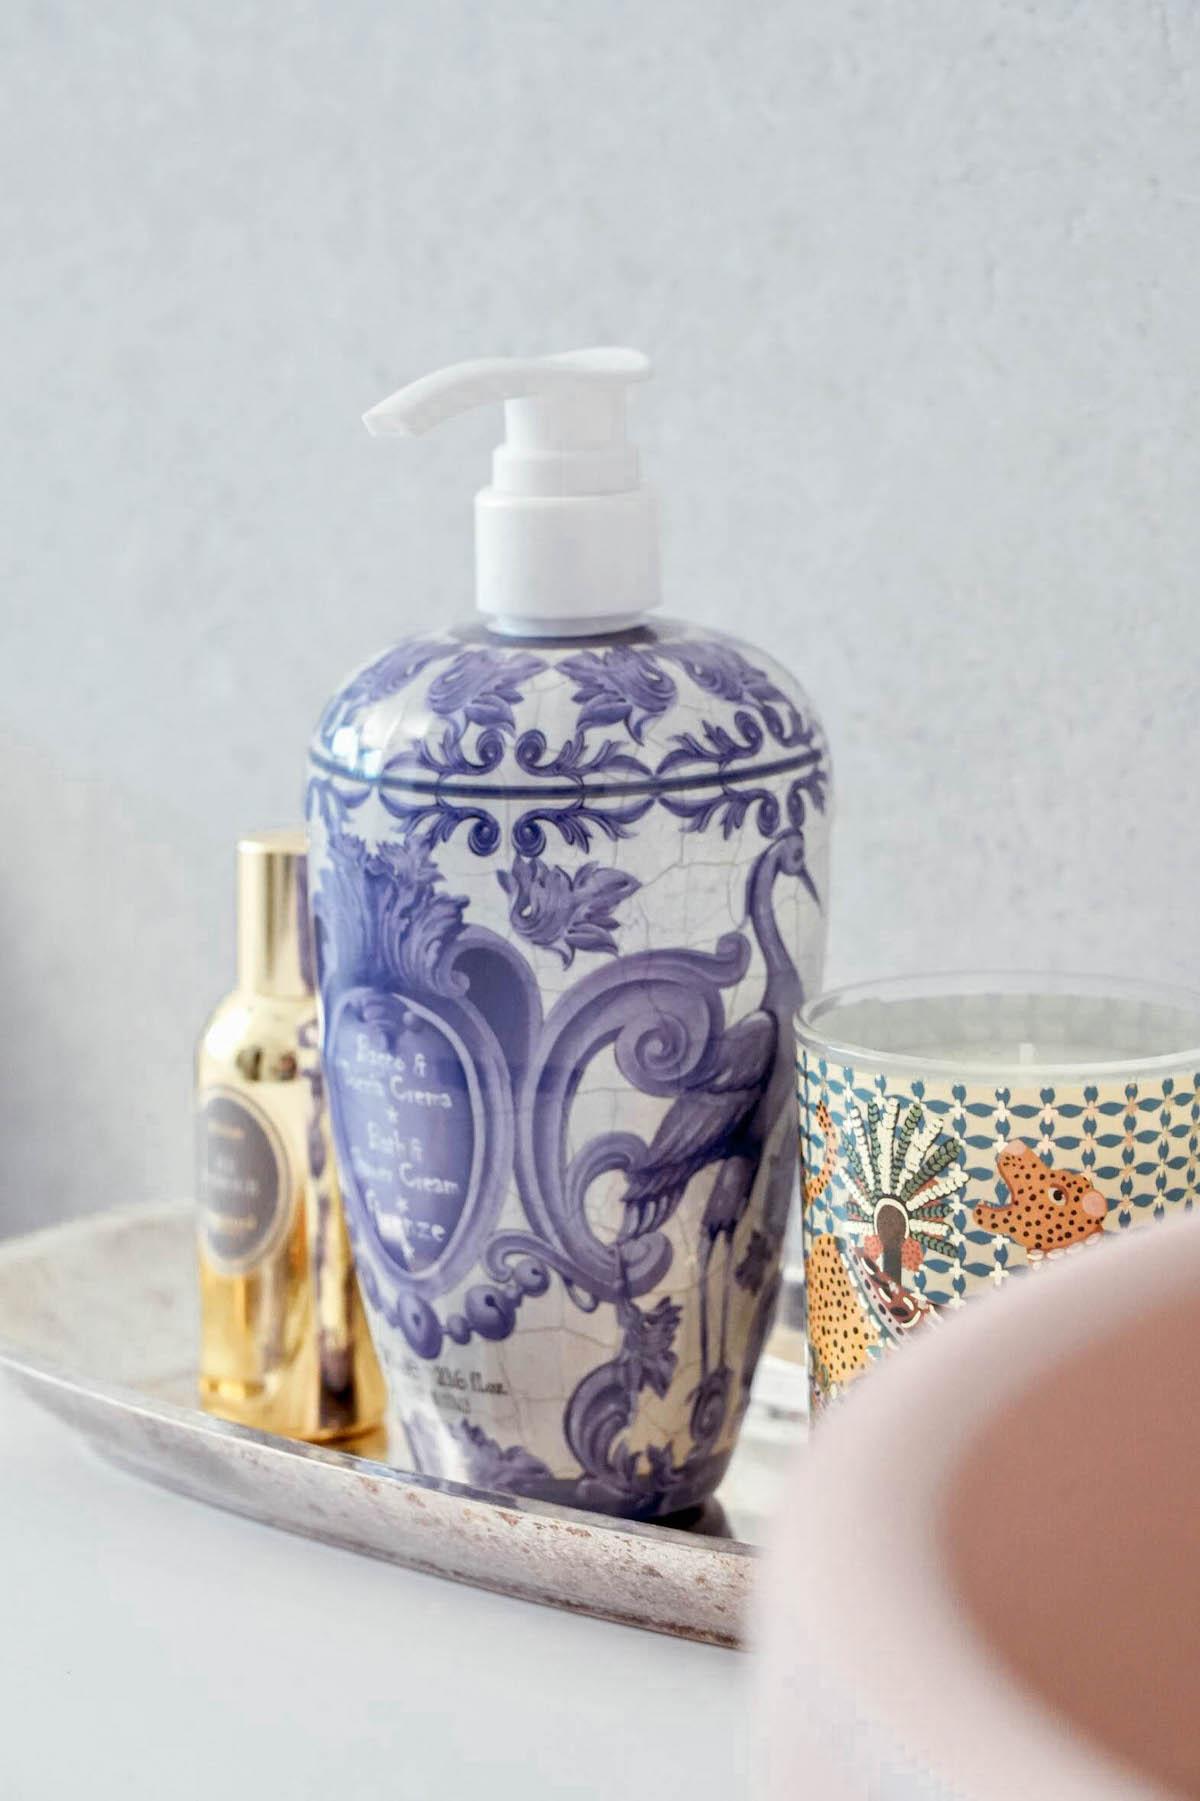 Vintage soaps and perfumes mix vintage decor into a modern home